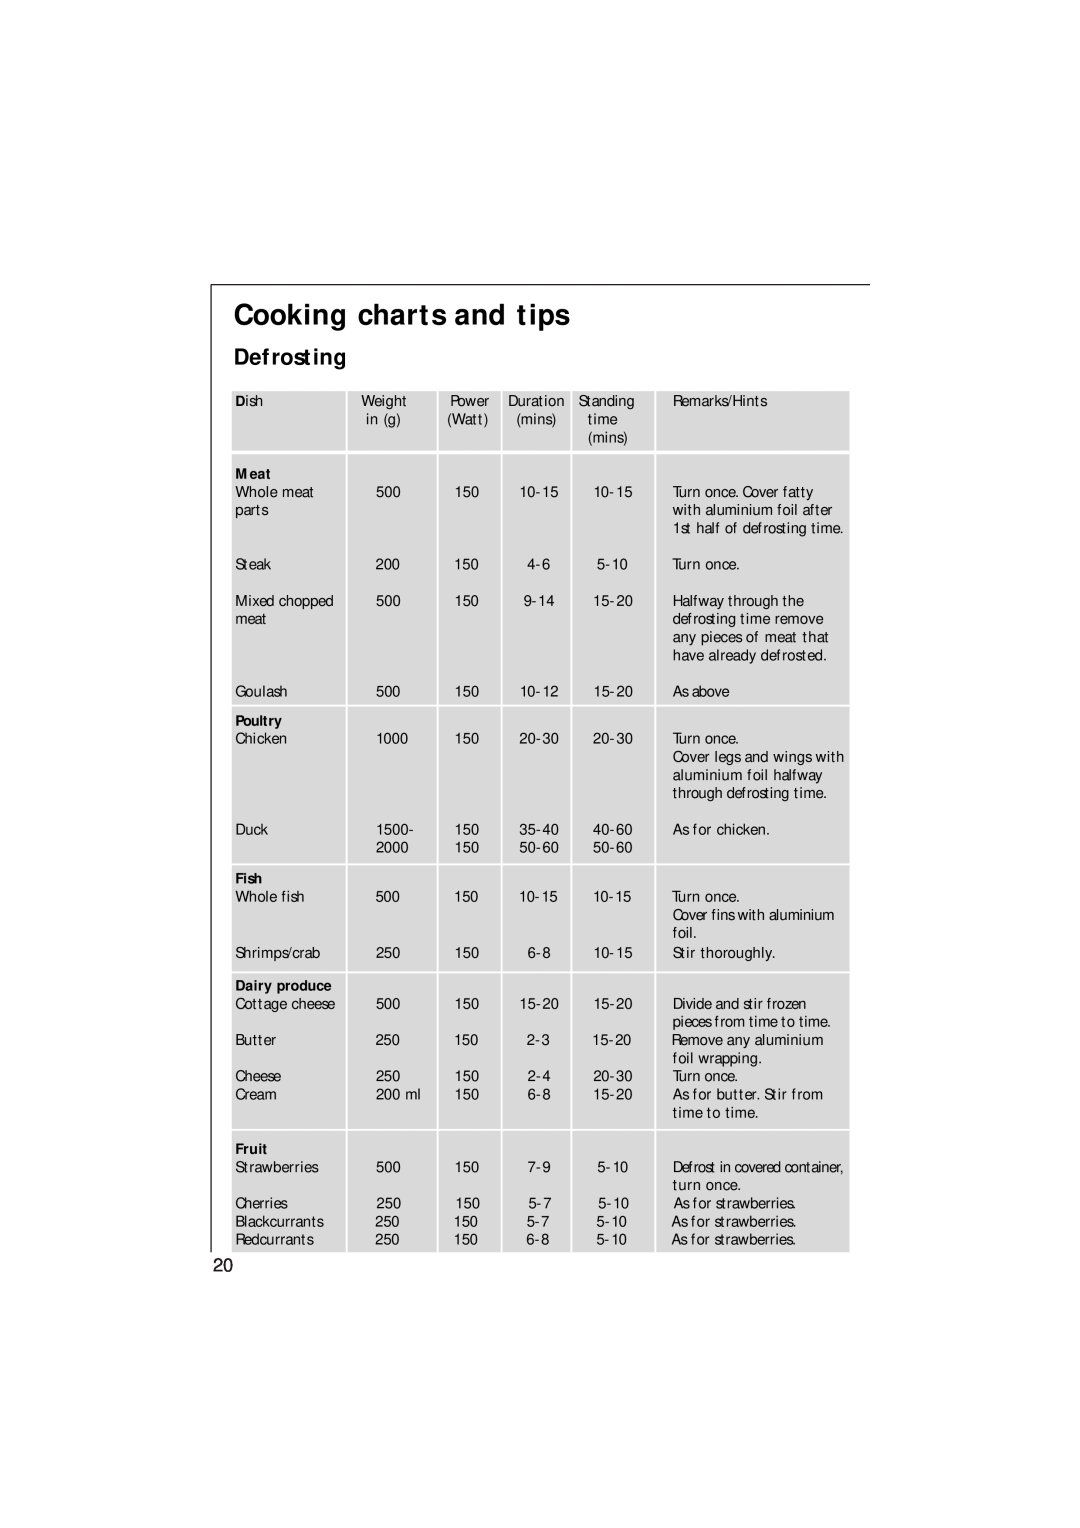 AEG 153 E manual Cooking charts and tips, Defrosting, Meat, Poultry, Fish, Dairy produce, Fruit 